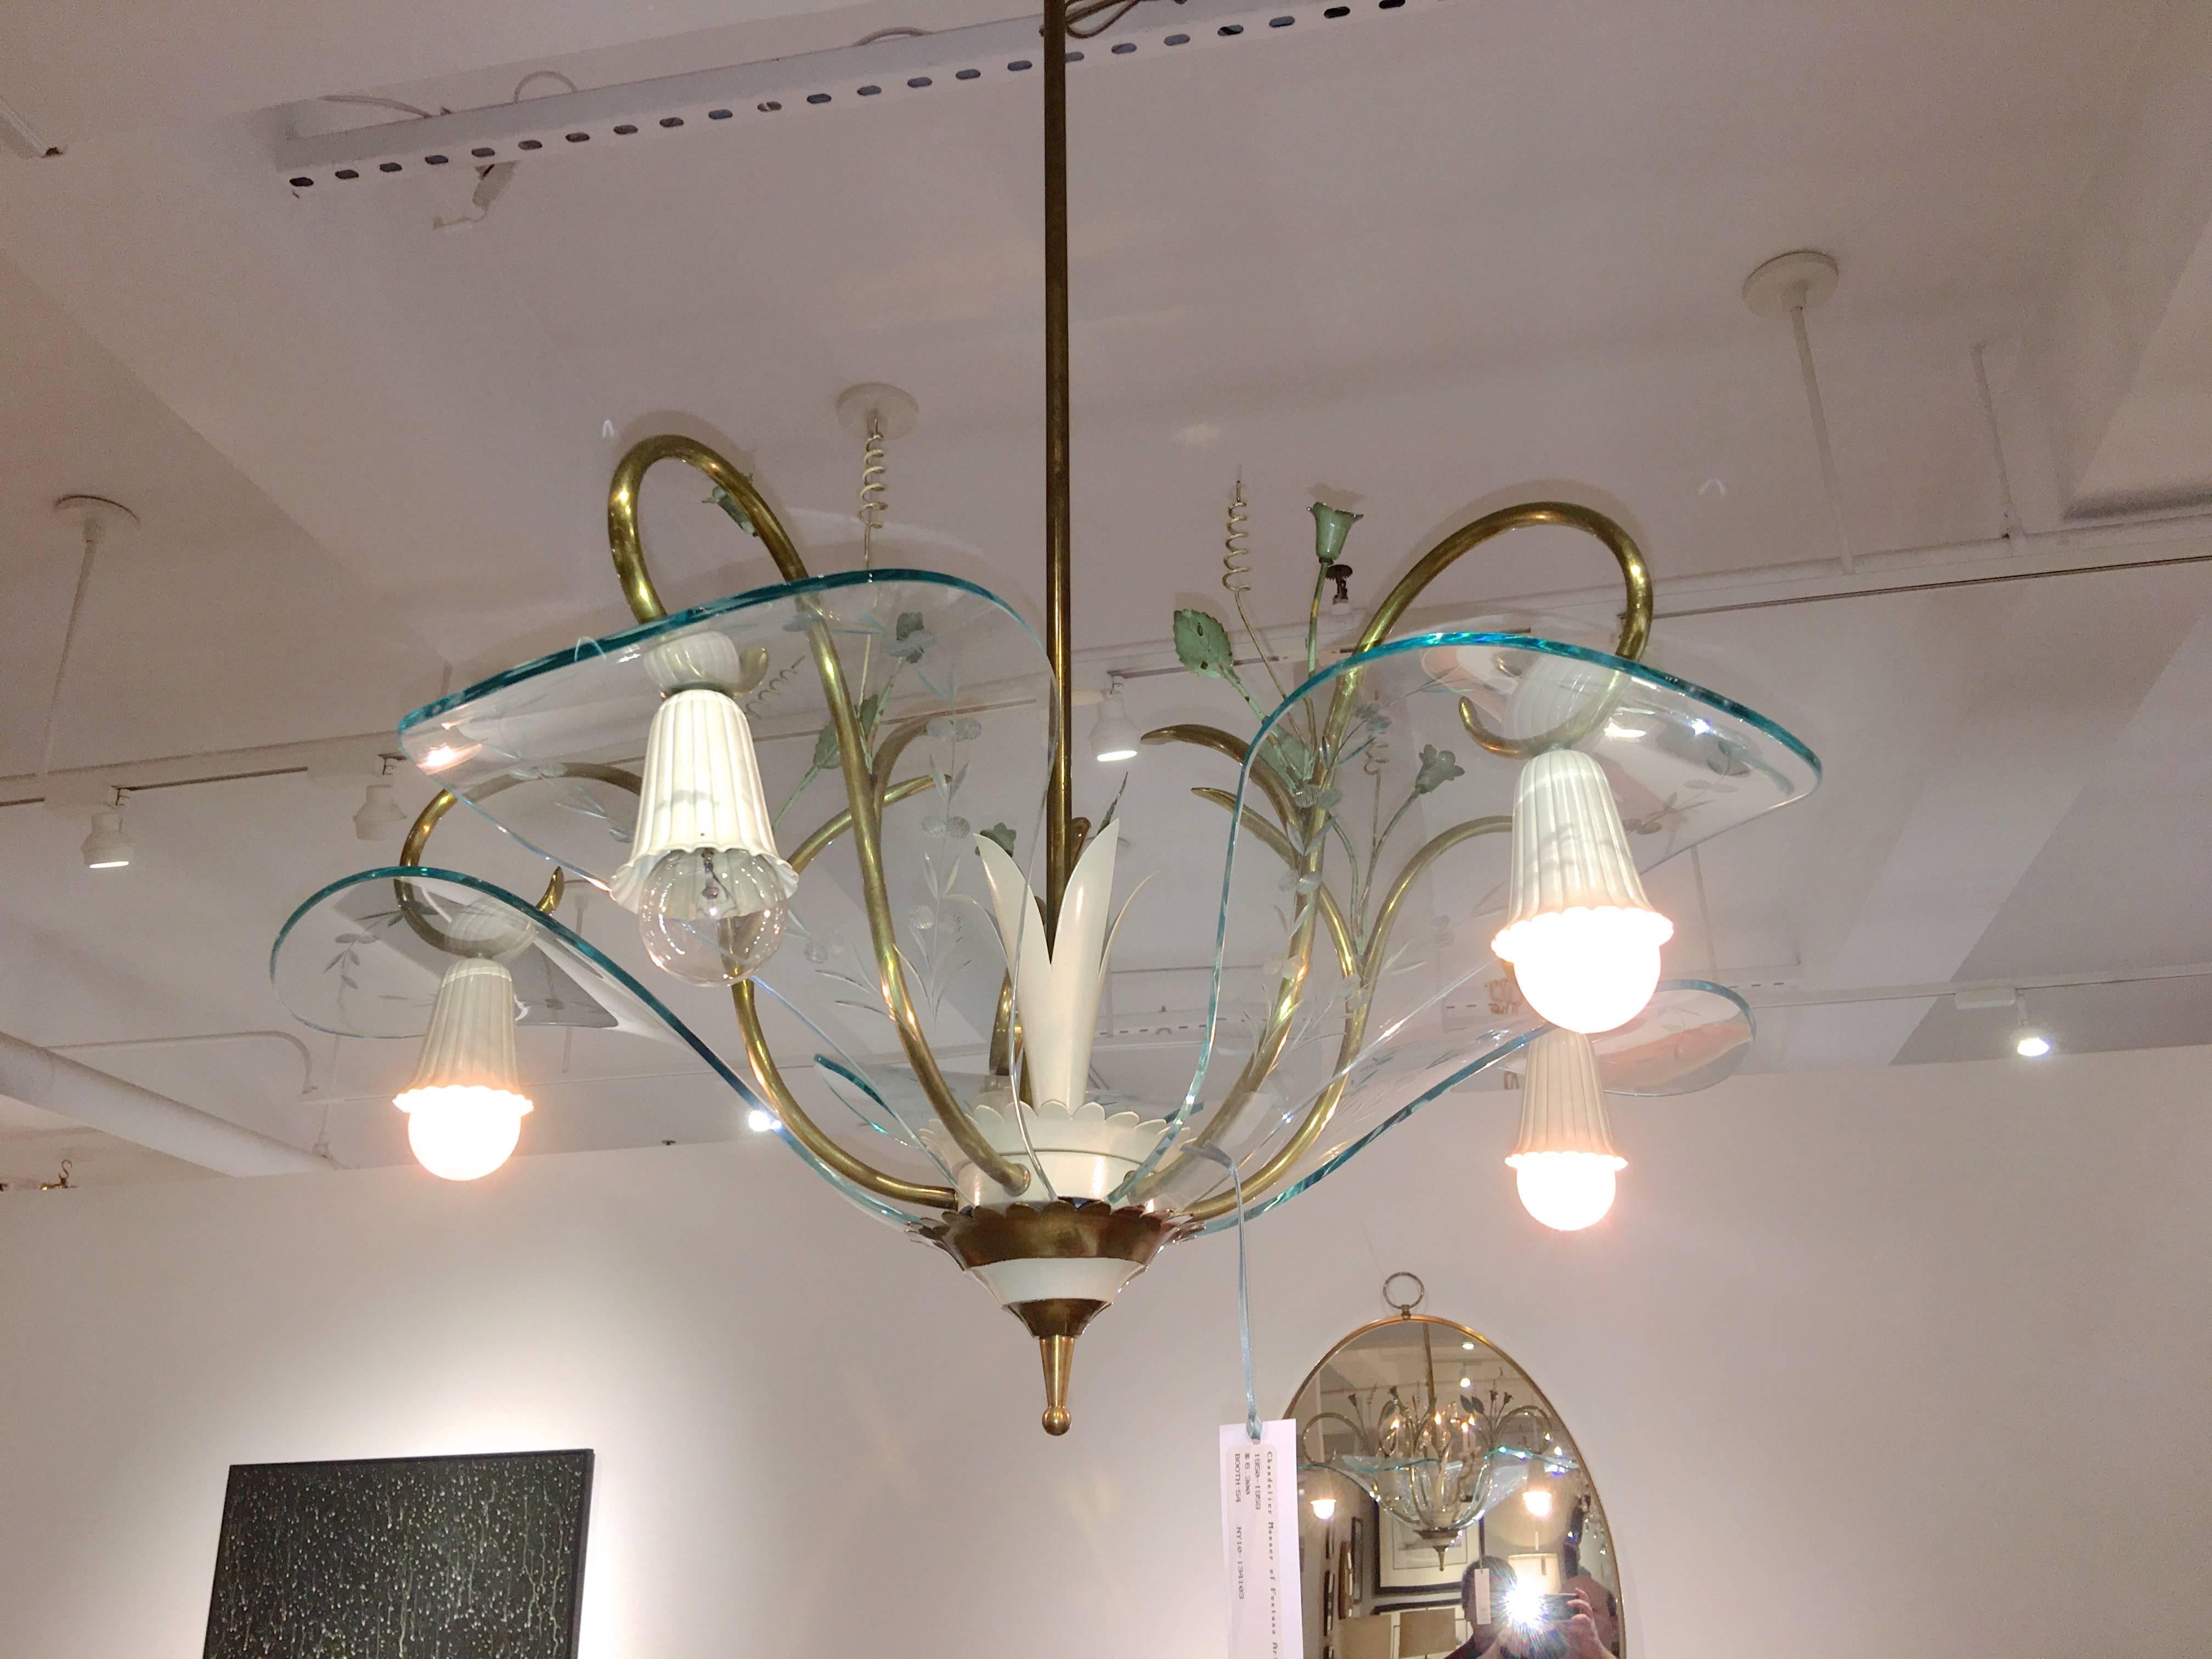 Enameled 1950's Italian Chandelier Manner of Fontana Arte Etched Curved Glass Petals For Sale